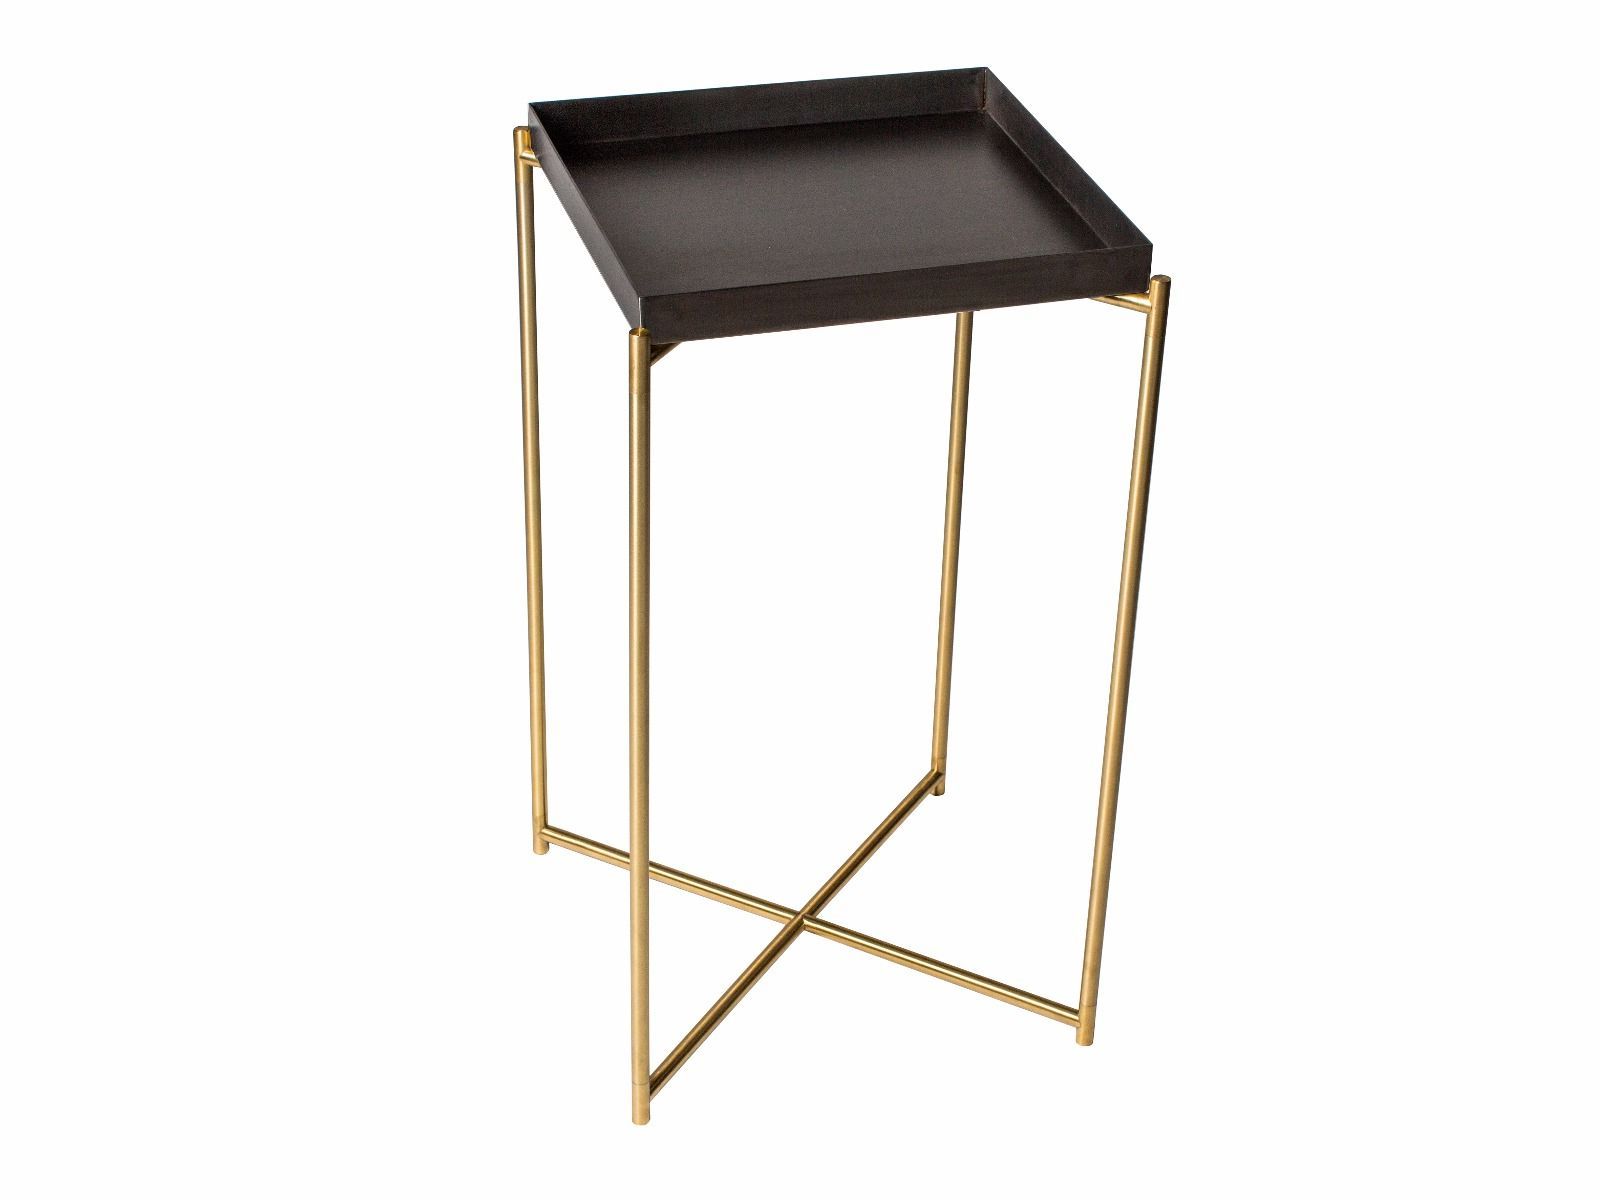 Gun Metal Tray Top & Brass Frame Intended For Most Popular Square Plant Stands (View 3 of 10)